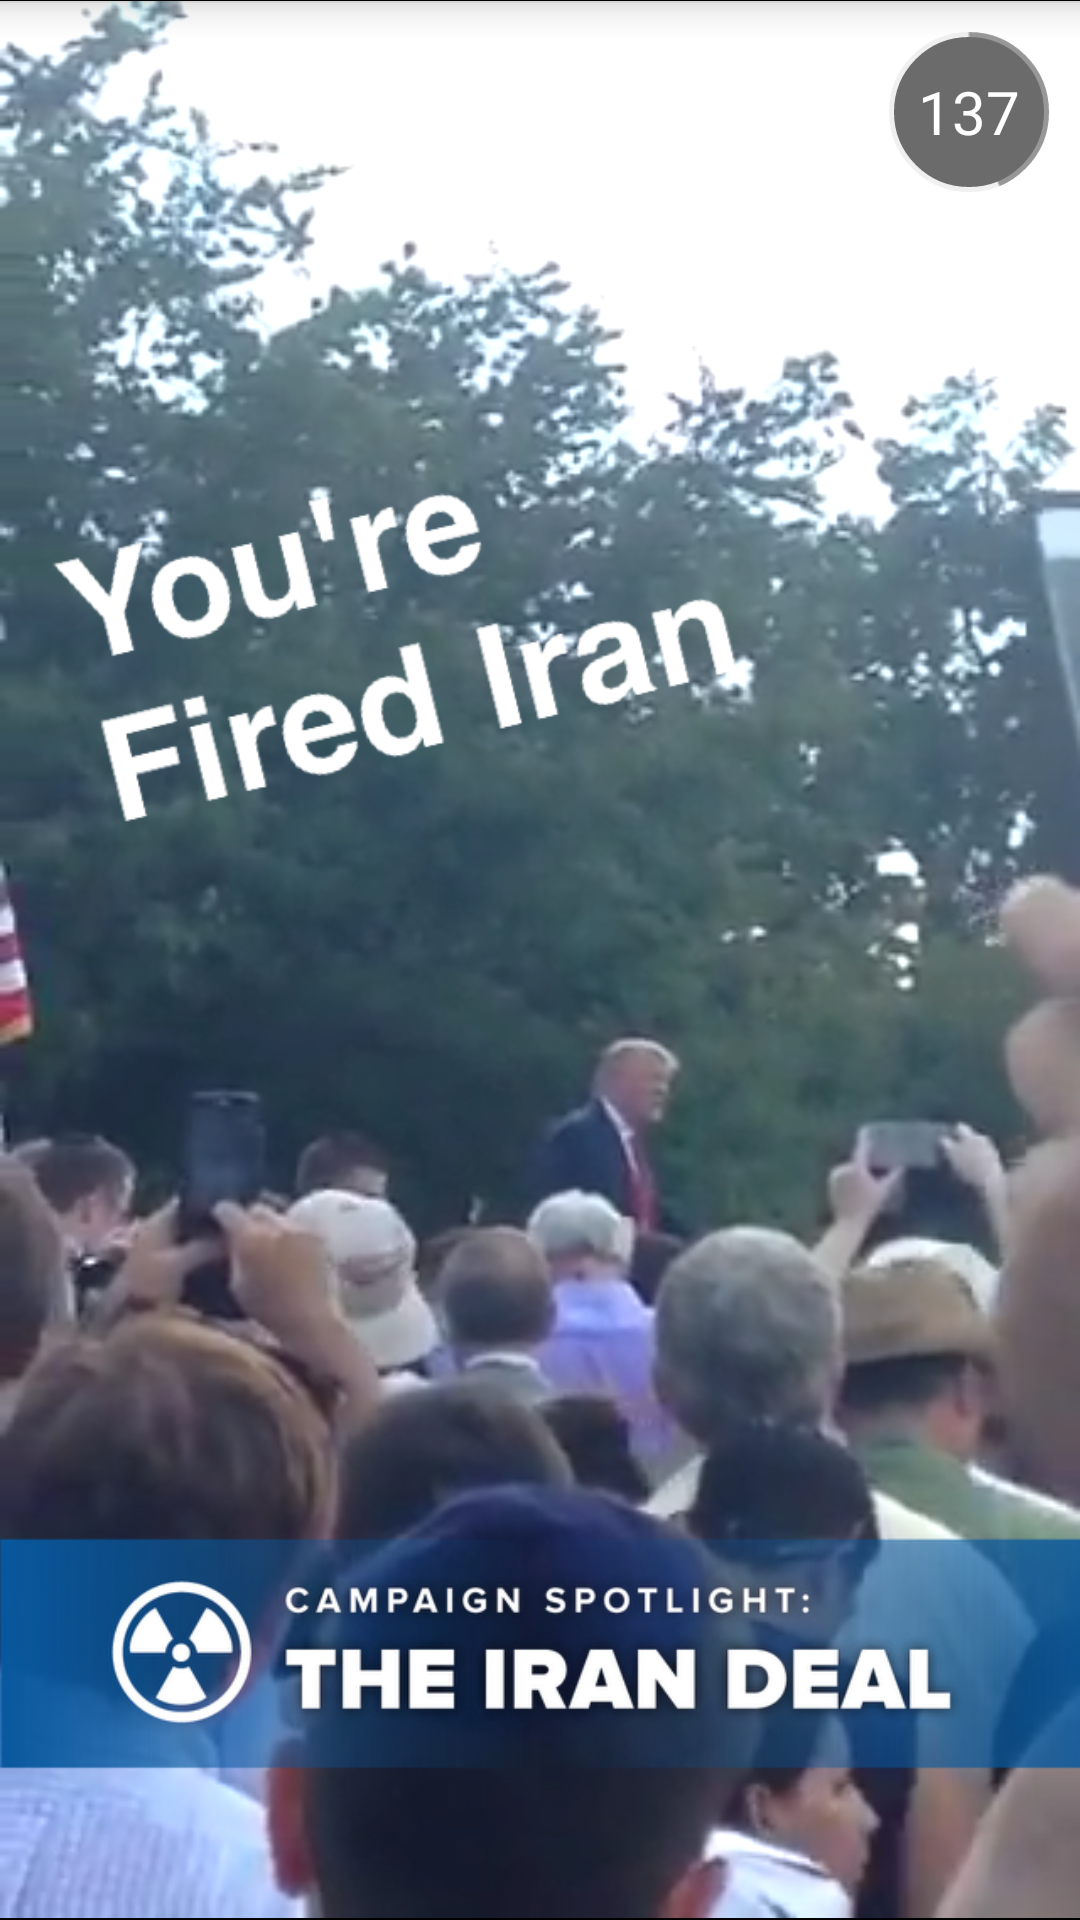 Screenshot shows use of Snapchat to cover Donald Trump's comments on the Iran deal.